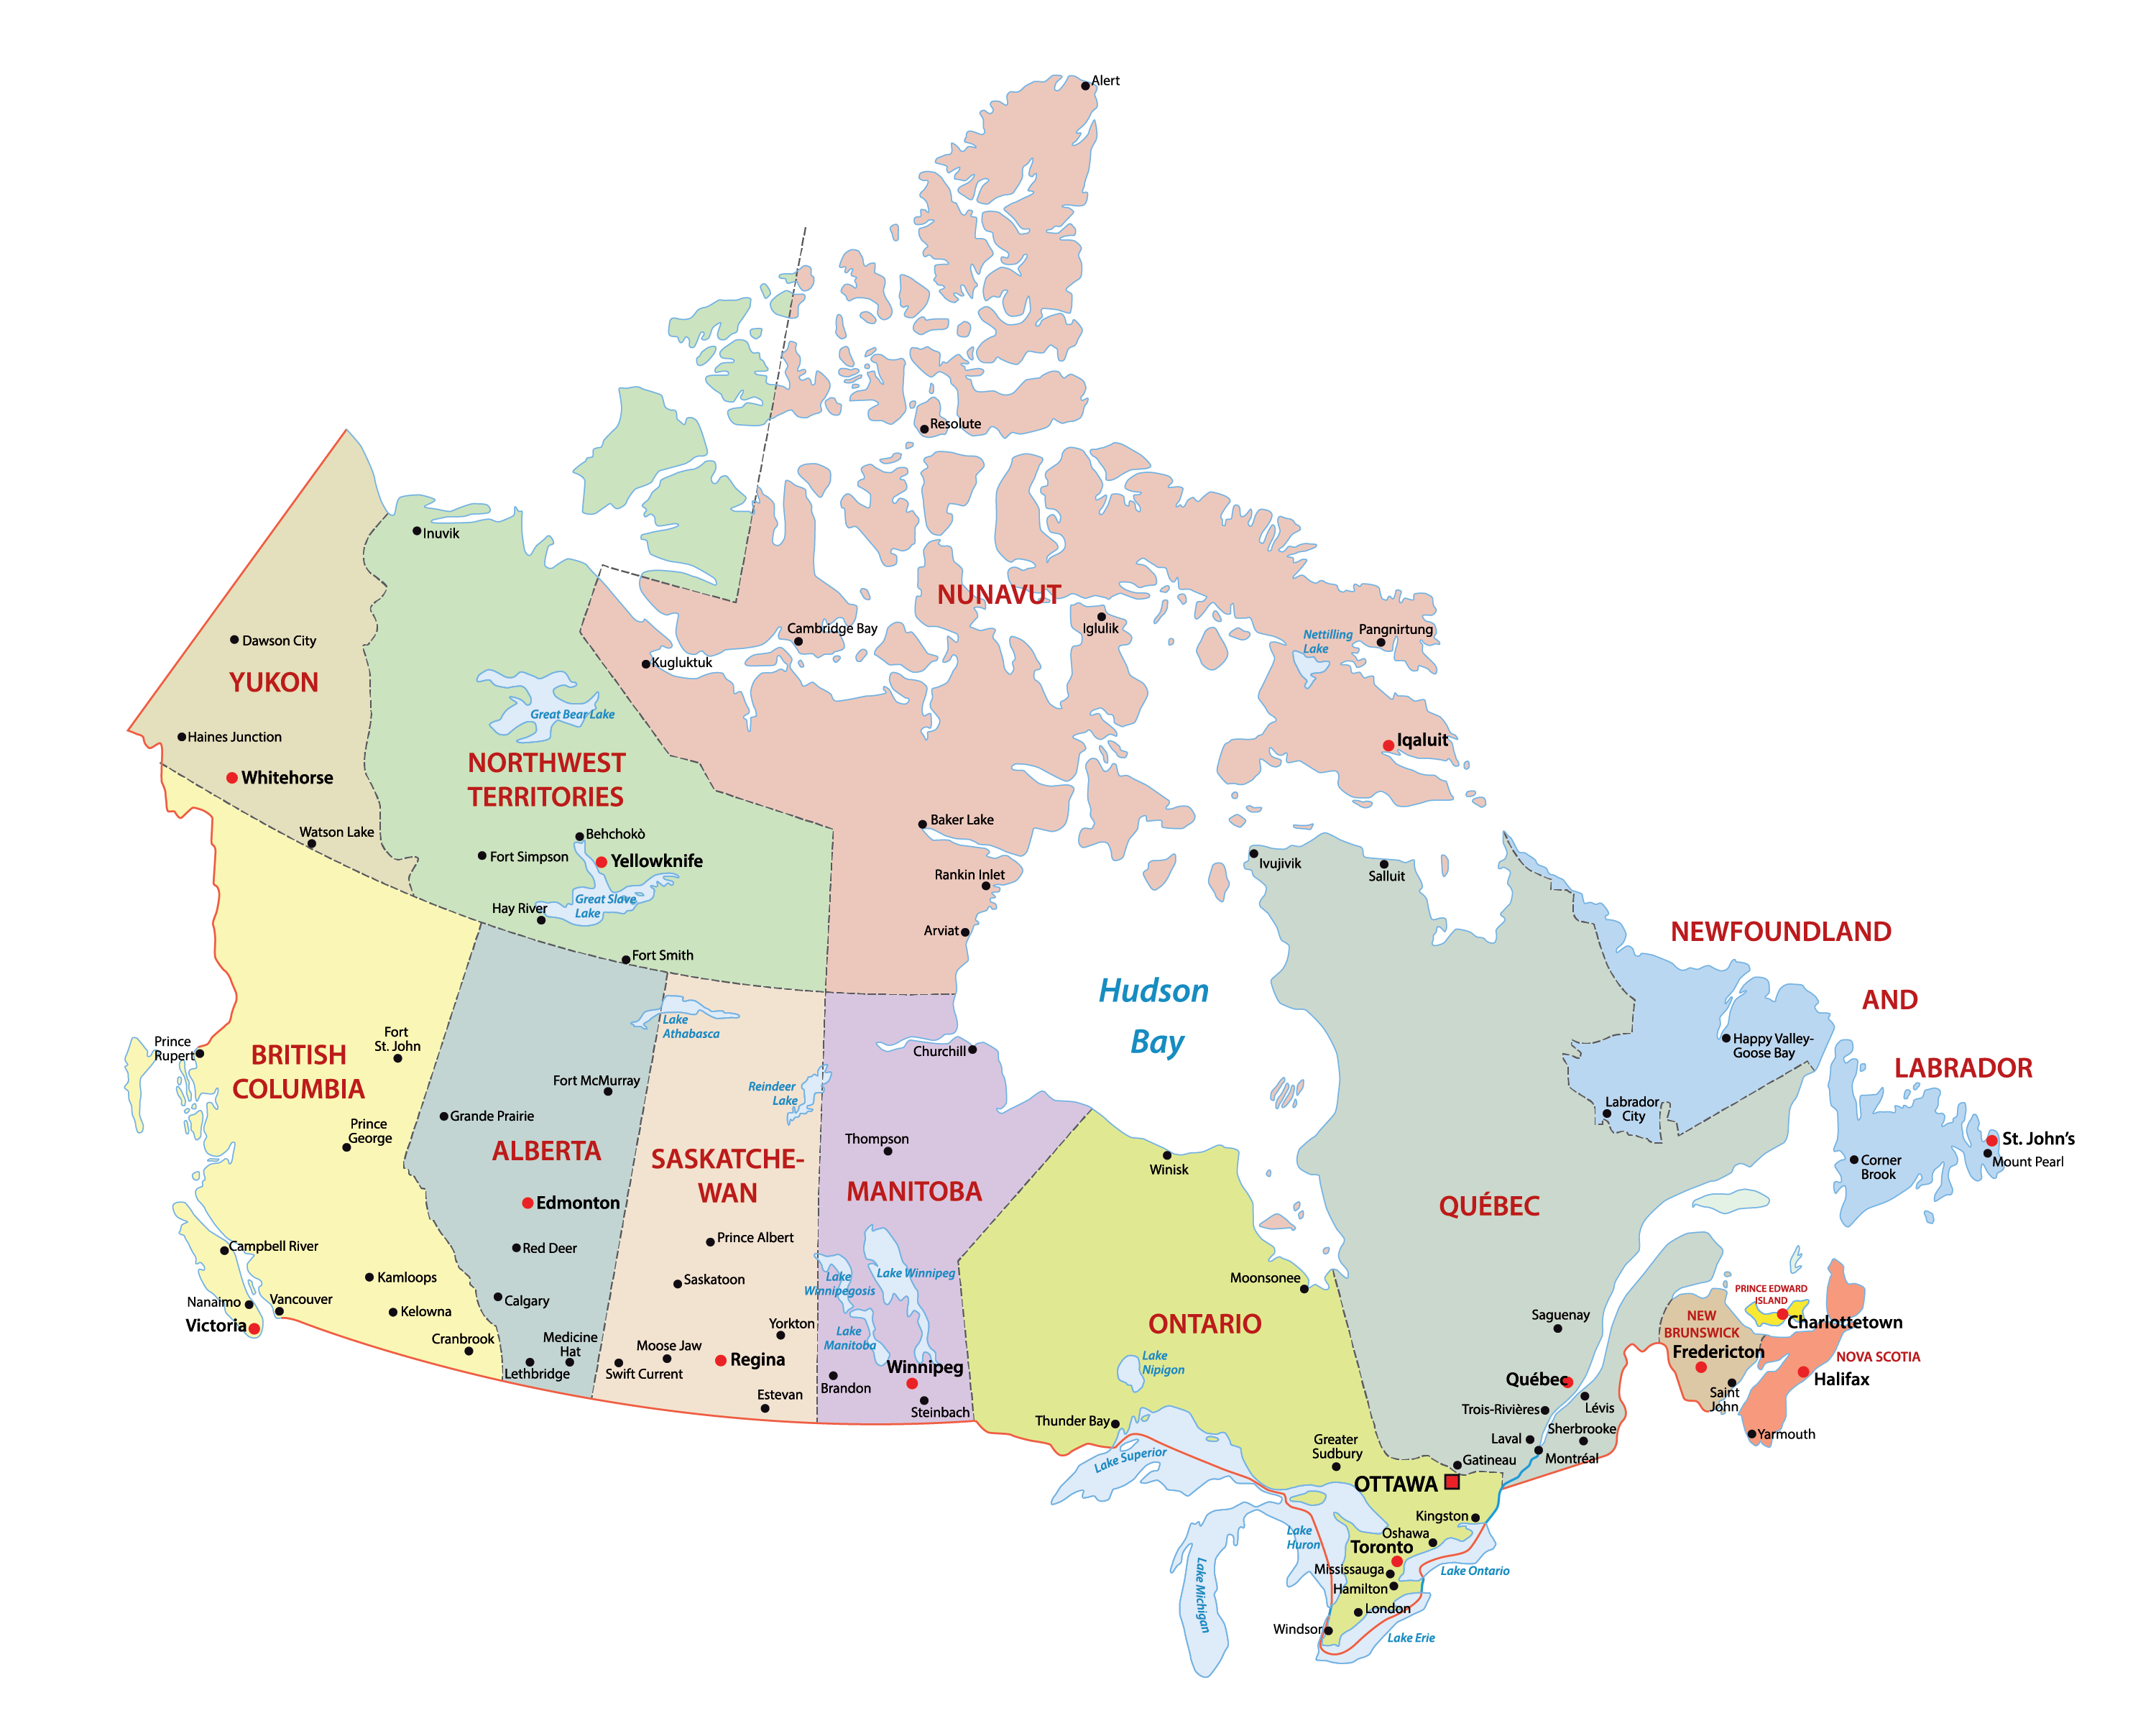 36 Label The Map Of Canada - Labels 2021